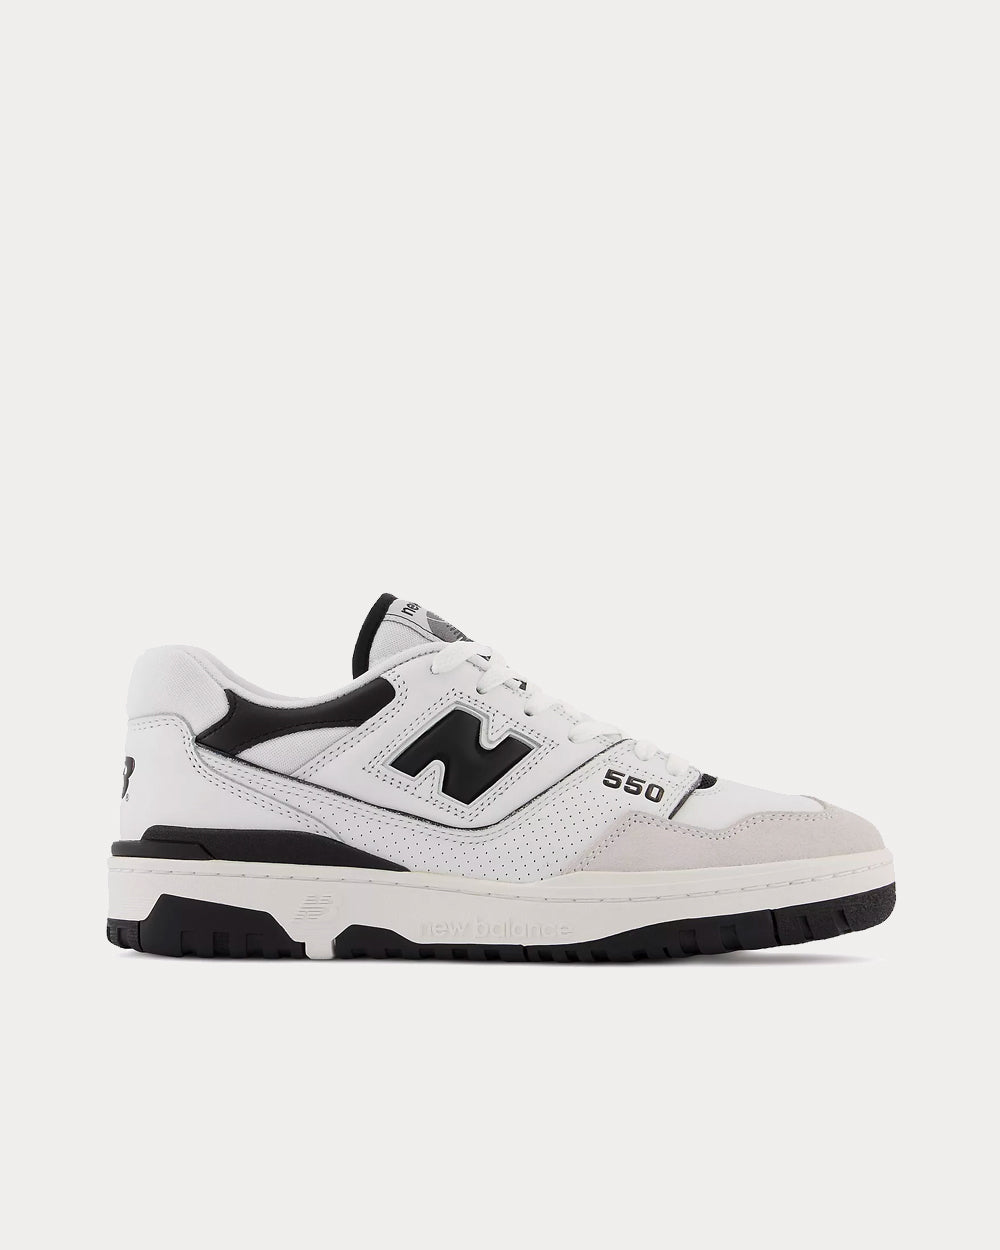 New Balance - 550 Sea Salt with Black Low Top Sneakers